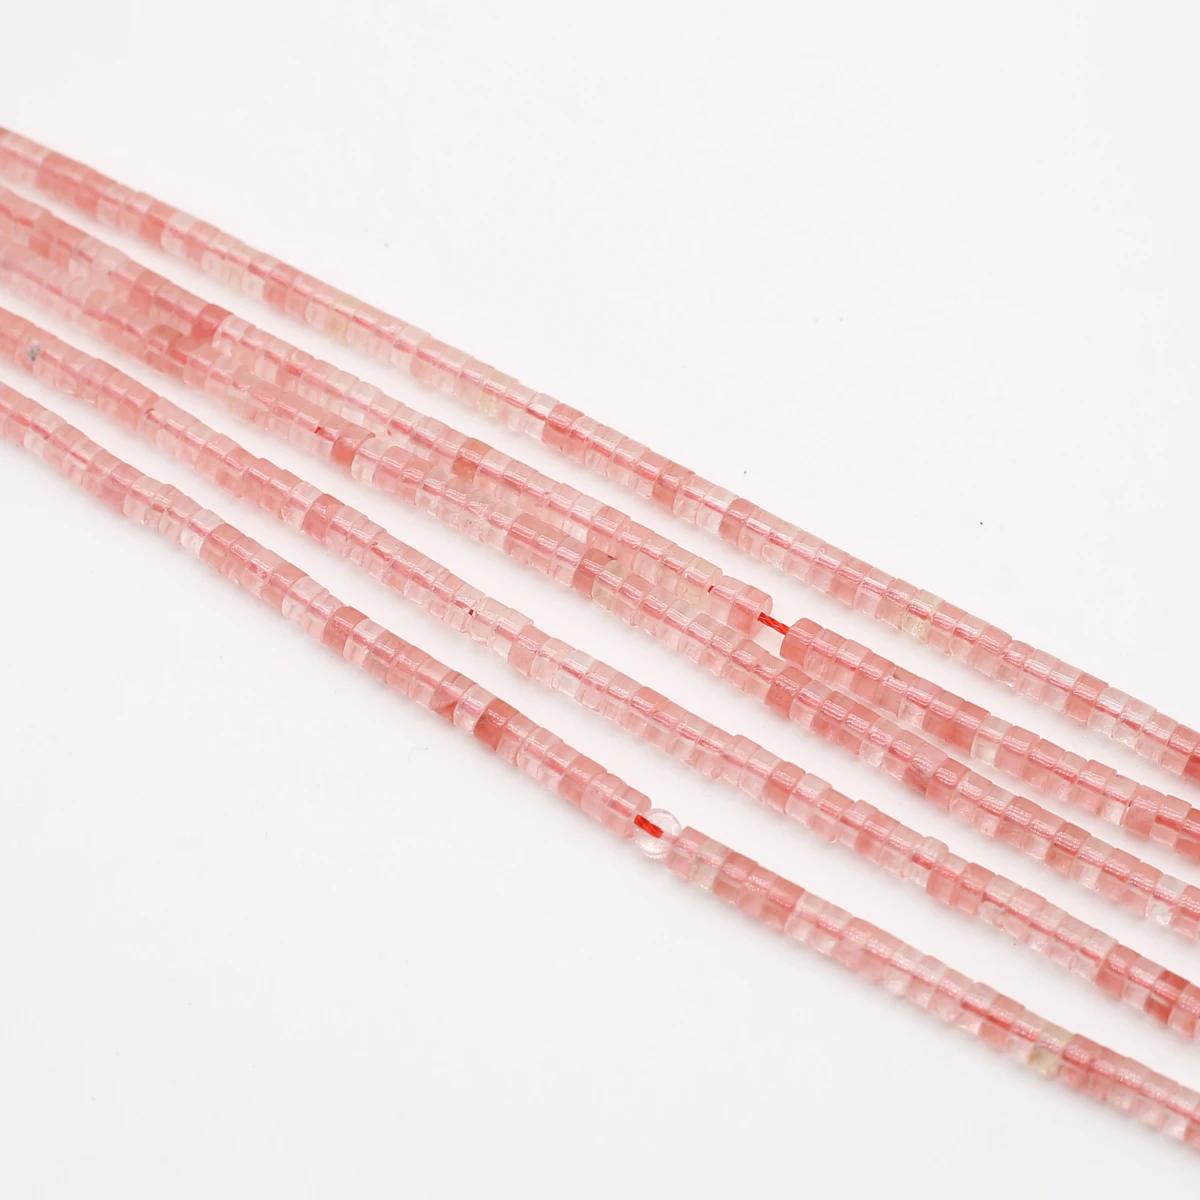 Купи Faceted Natural Stone Watermelon Red Beads 2x4mm Cylindrical Loose Spacer Beads for Jewelry Making DIY Accessories Wholesale Lot за 195 рублей в магазине AliExpress